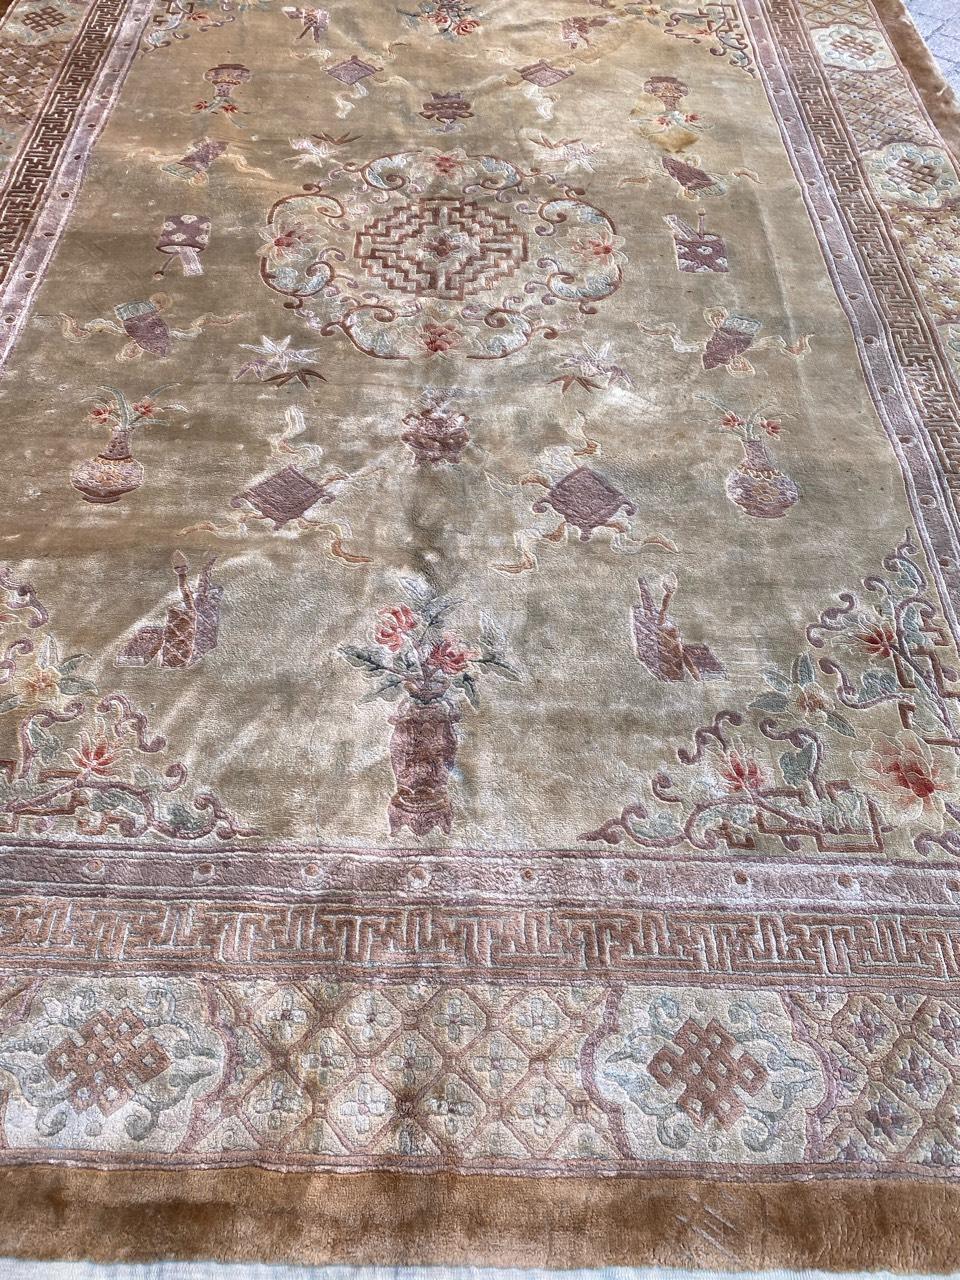 Exquisite late 20th-century Chinese silk rug featuring a stunning traditional Chinese design. Light colors of brown, beige, green, and pink adorn this masterpiece, meticulously hand-knotted with silk velvet on a silk foundation. Don't miss the